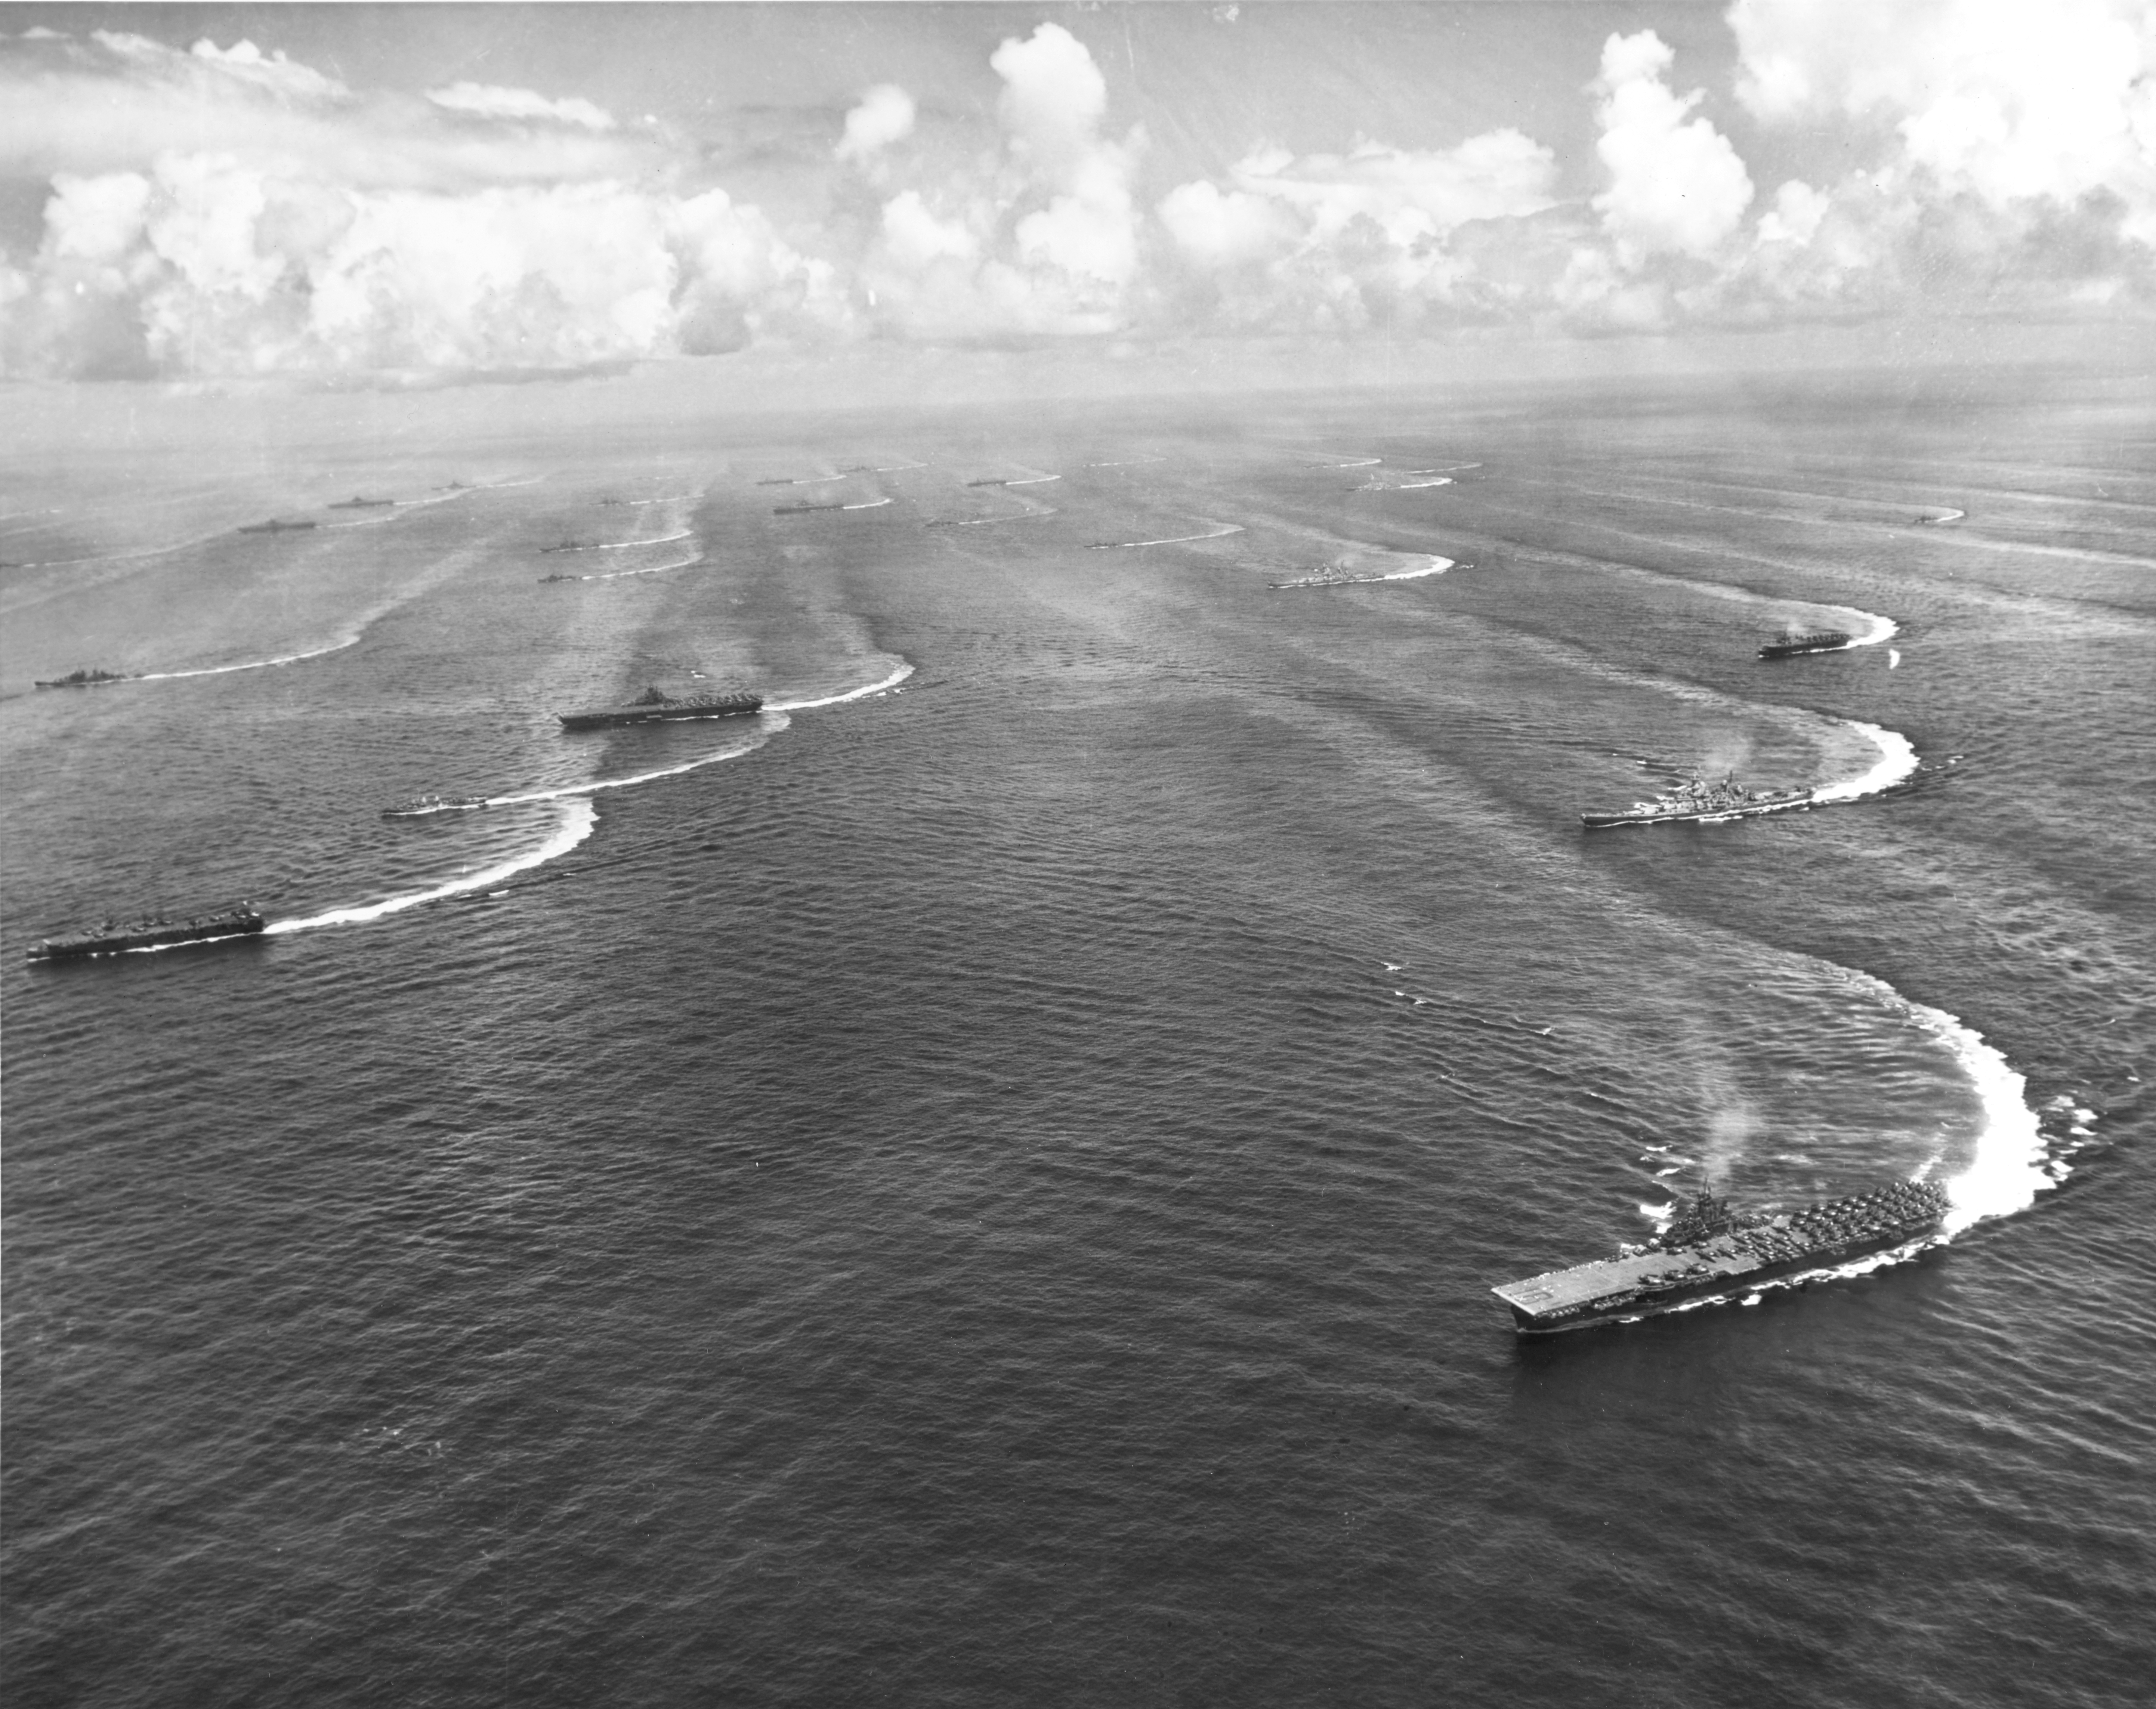 USS Wasp (lower right) and other Essex-class carriers, escorted by battleships, cruisers, and destroyers of Task Force 38 maneuvering off Japan, 17 Aug 1945